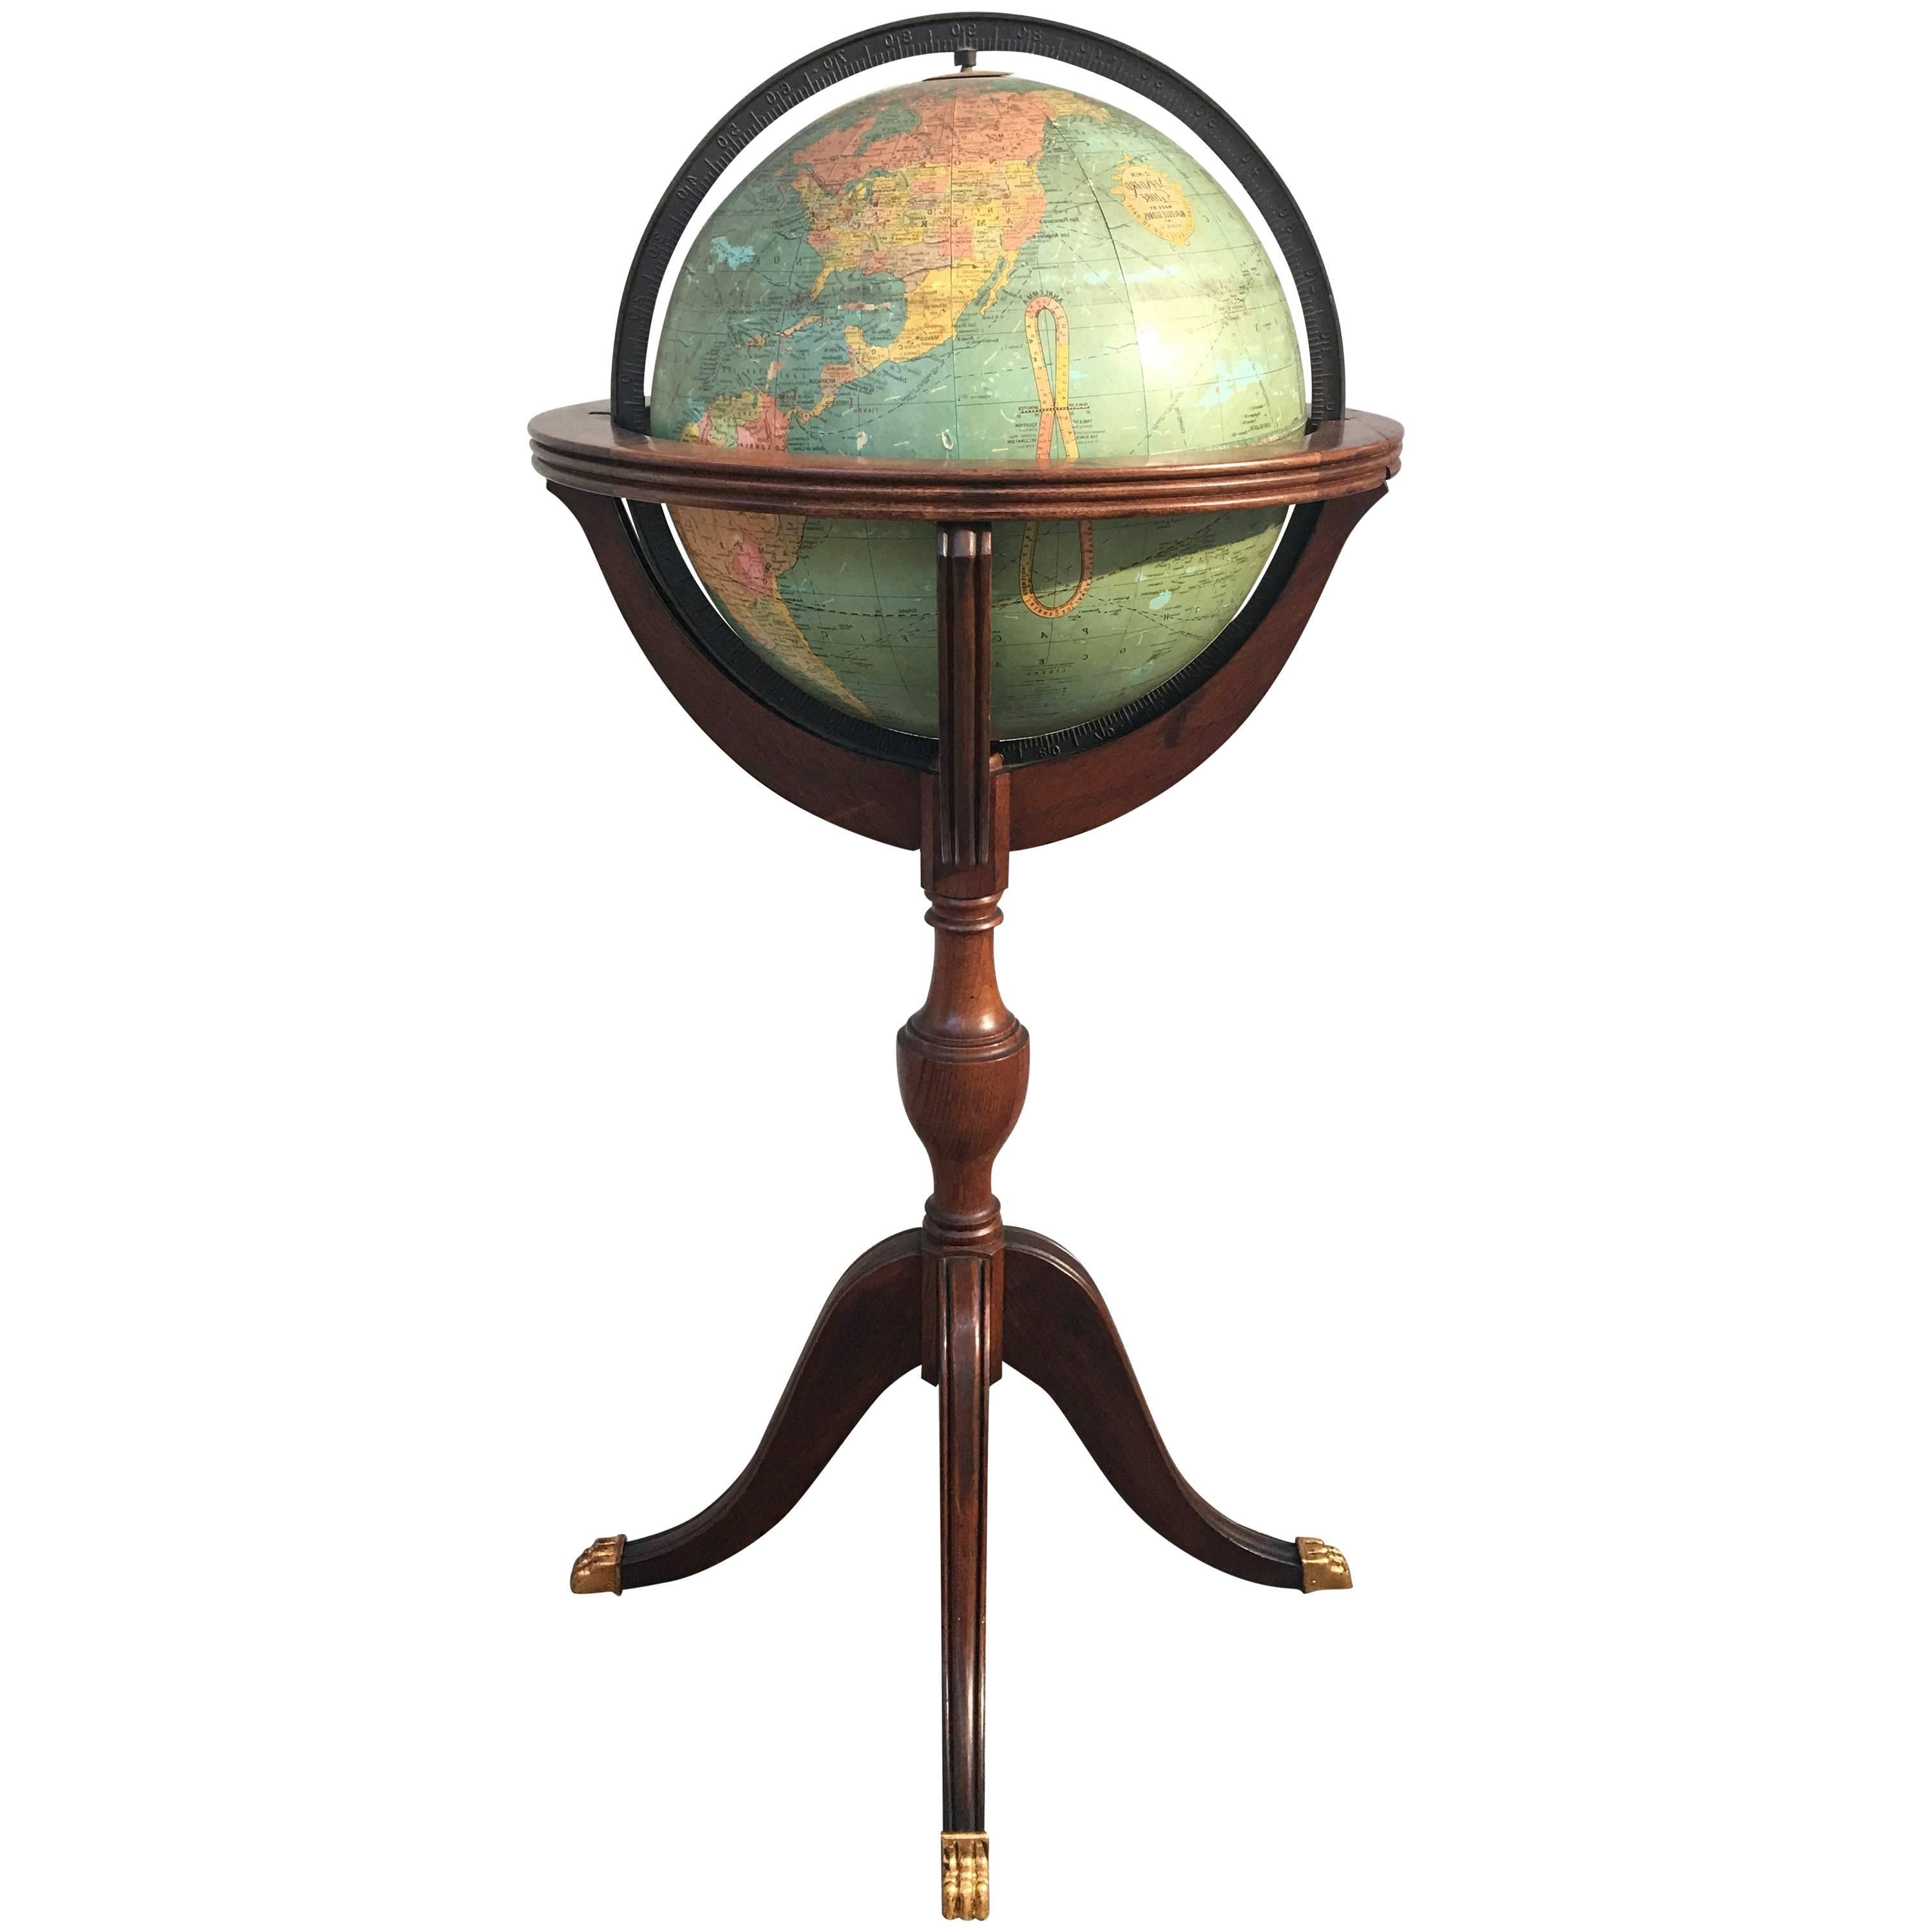 Terrestrial Globe Made by Replogle Globes, Chicago